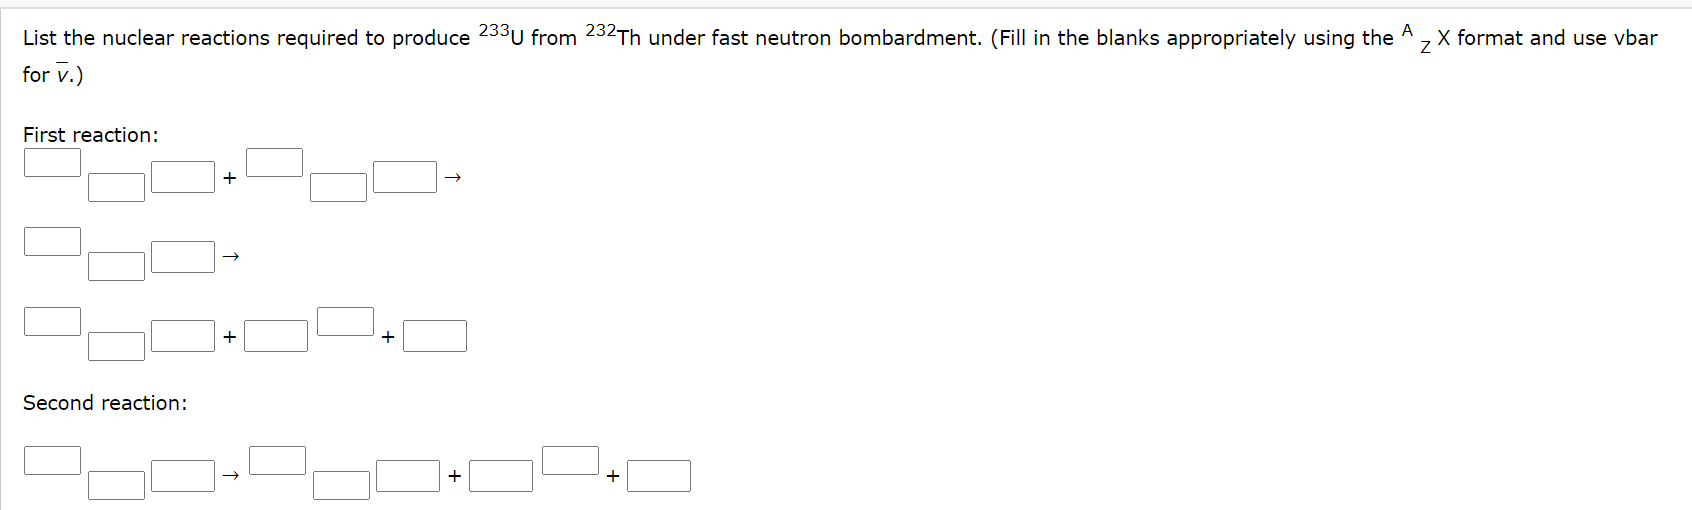 List the nuclear reactions required to produce 233U from 232Th under fast neutron bombardment. (Fill in the blanks appropriately using the A , X format and use vbar
for v.)
First reaction:
+
Second reaction:
